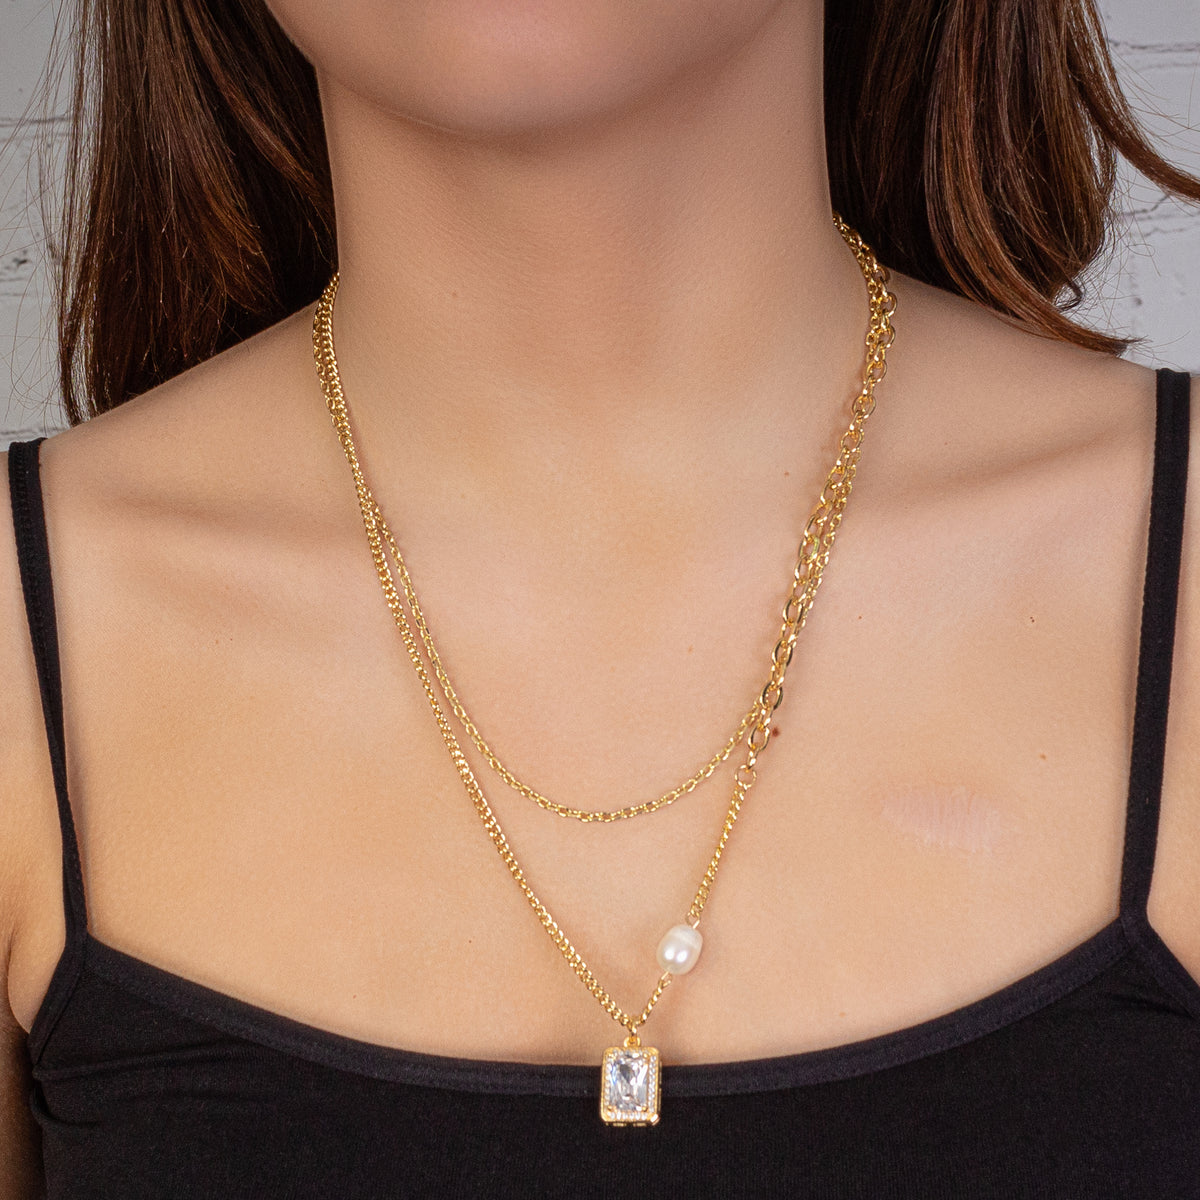 1123 - Dainty Crystal Pendant Necklace - Gold